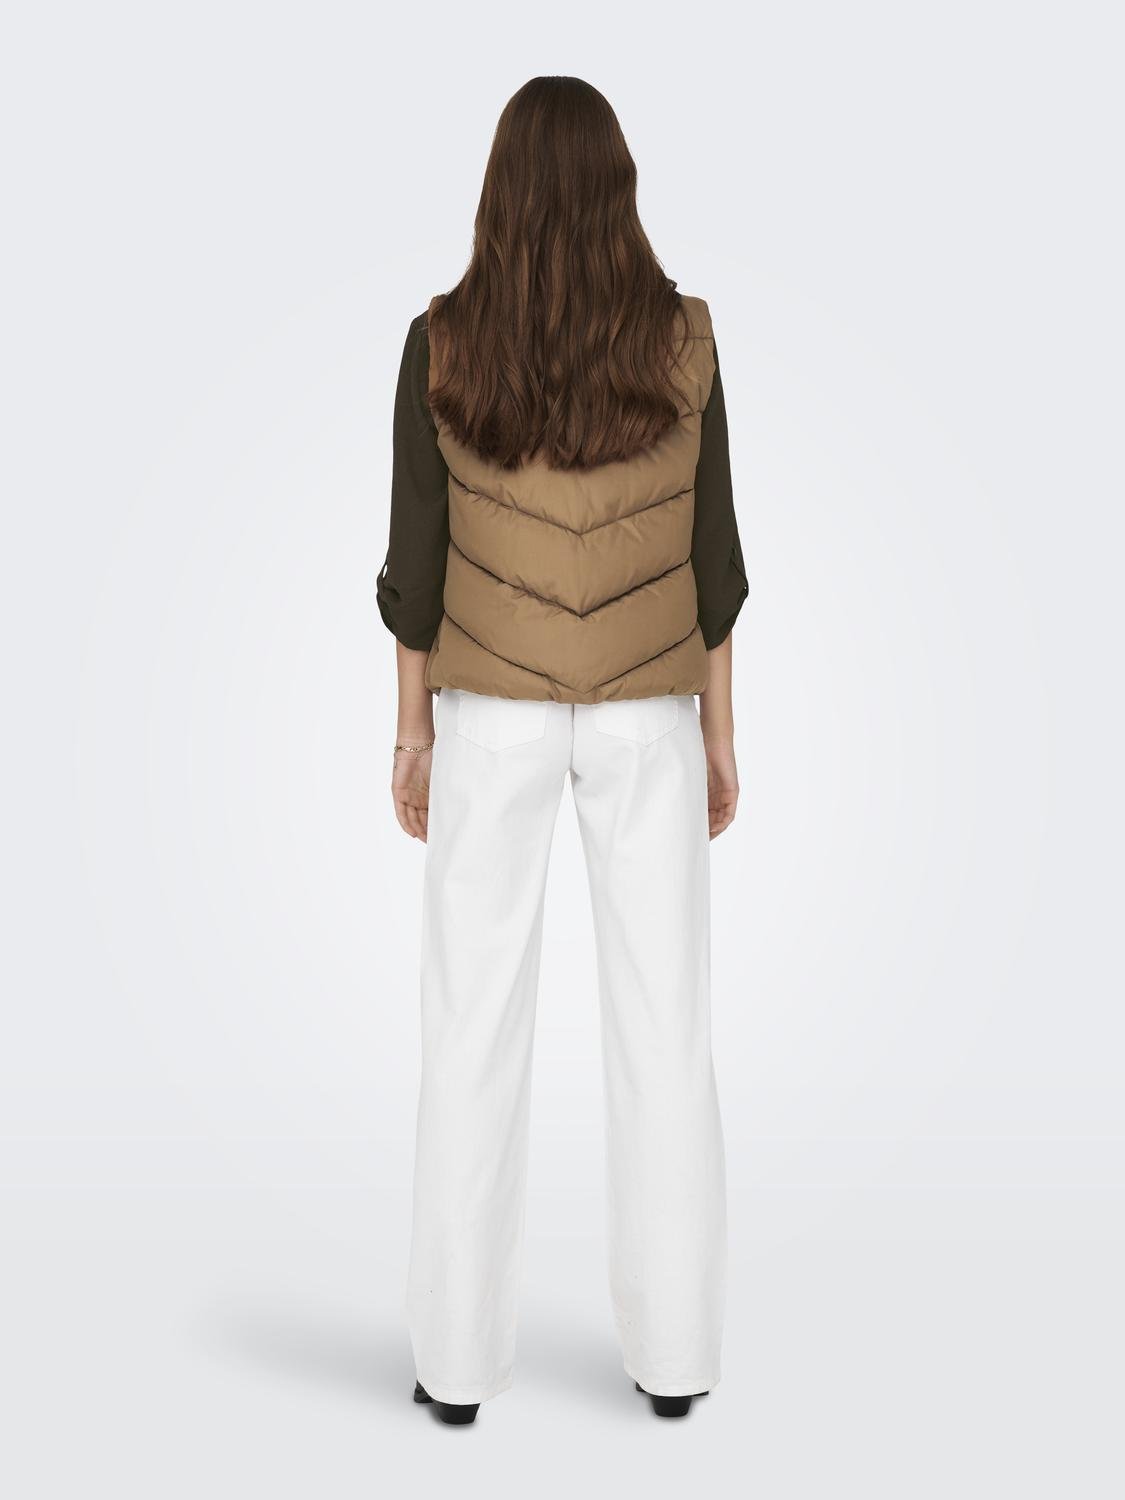 ONLY High neck Otw Gilet -Toasted Coconut - 15310770